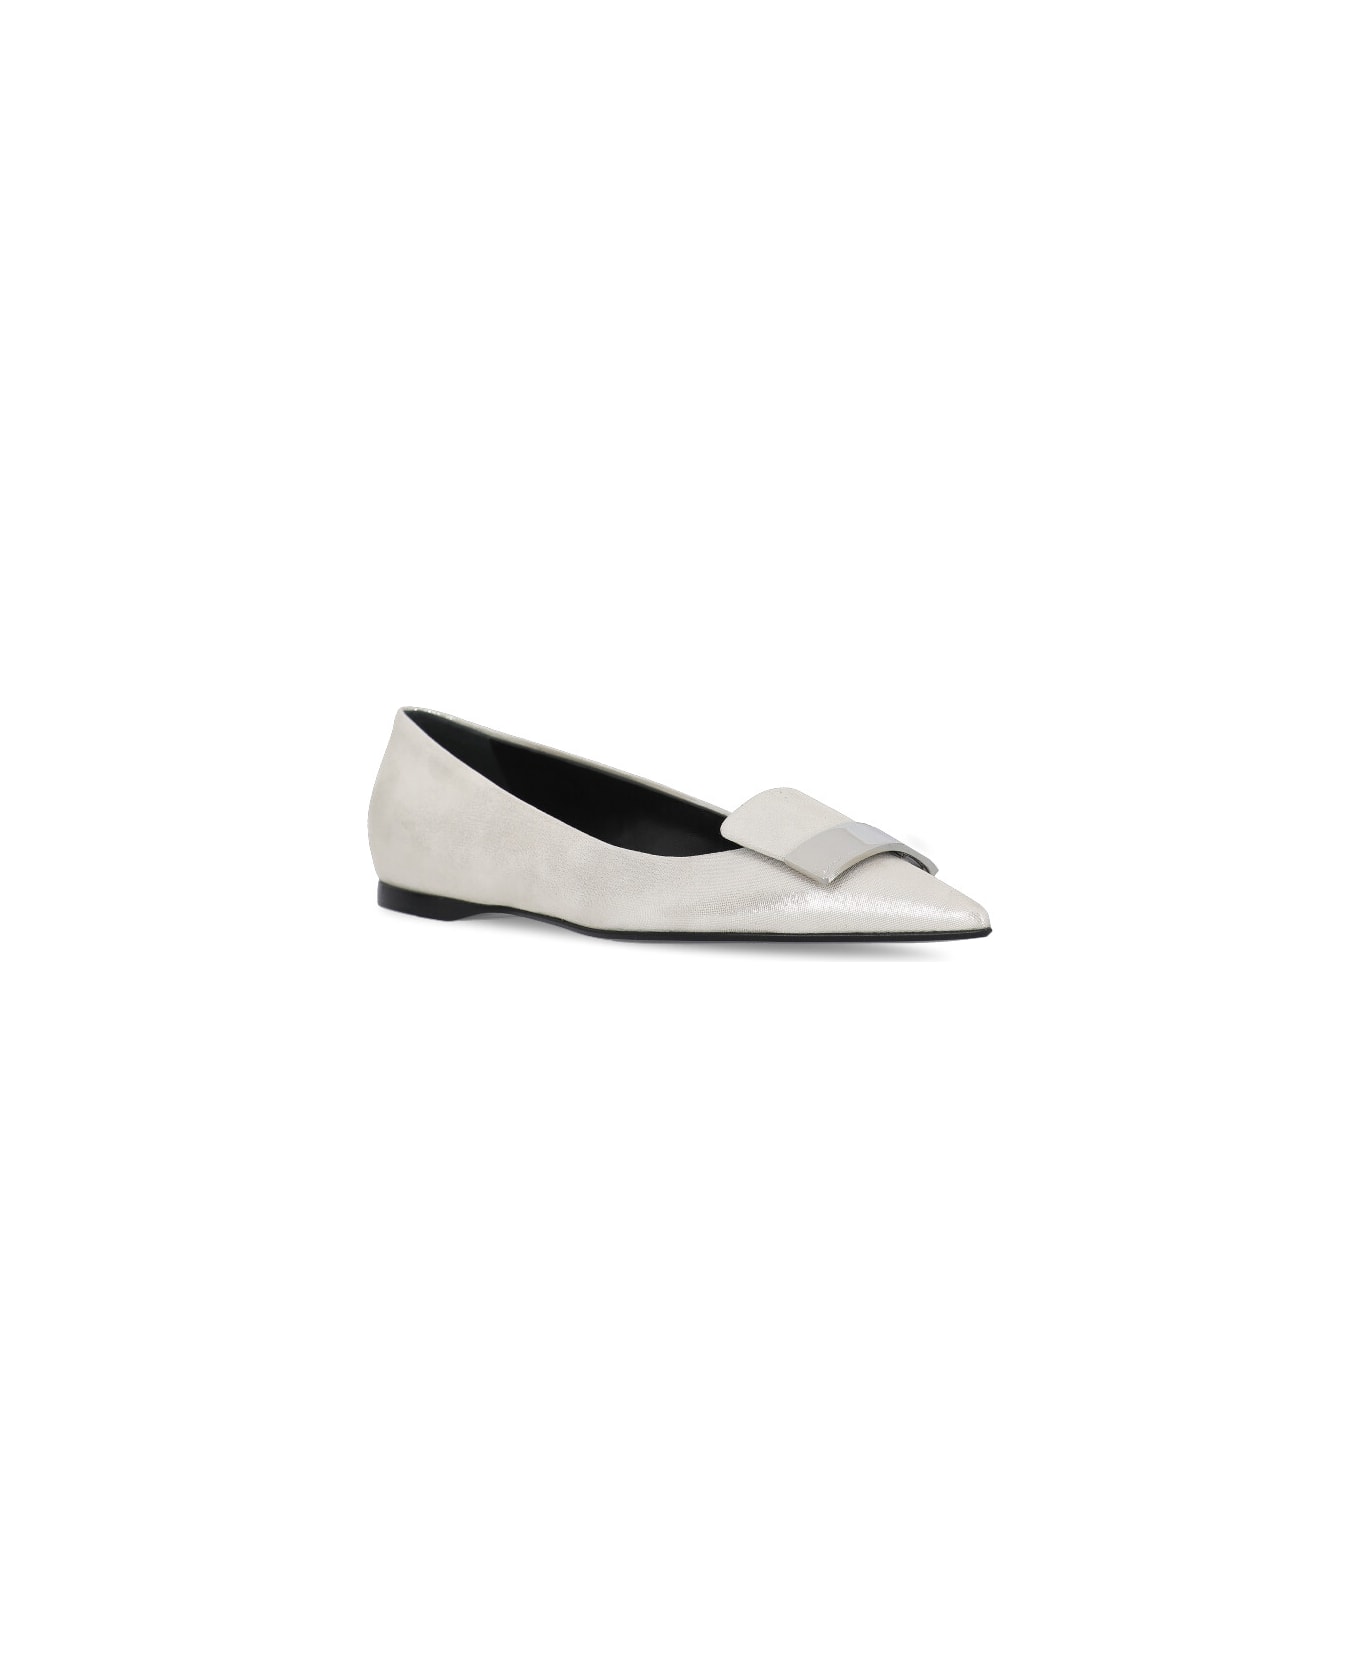 Sergio Rossi Leather Ballet Shoes - Silver